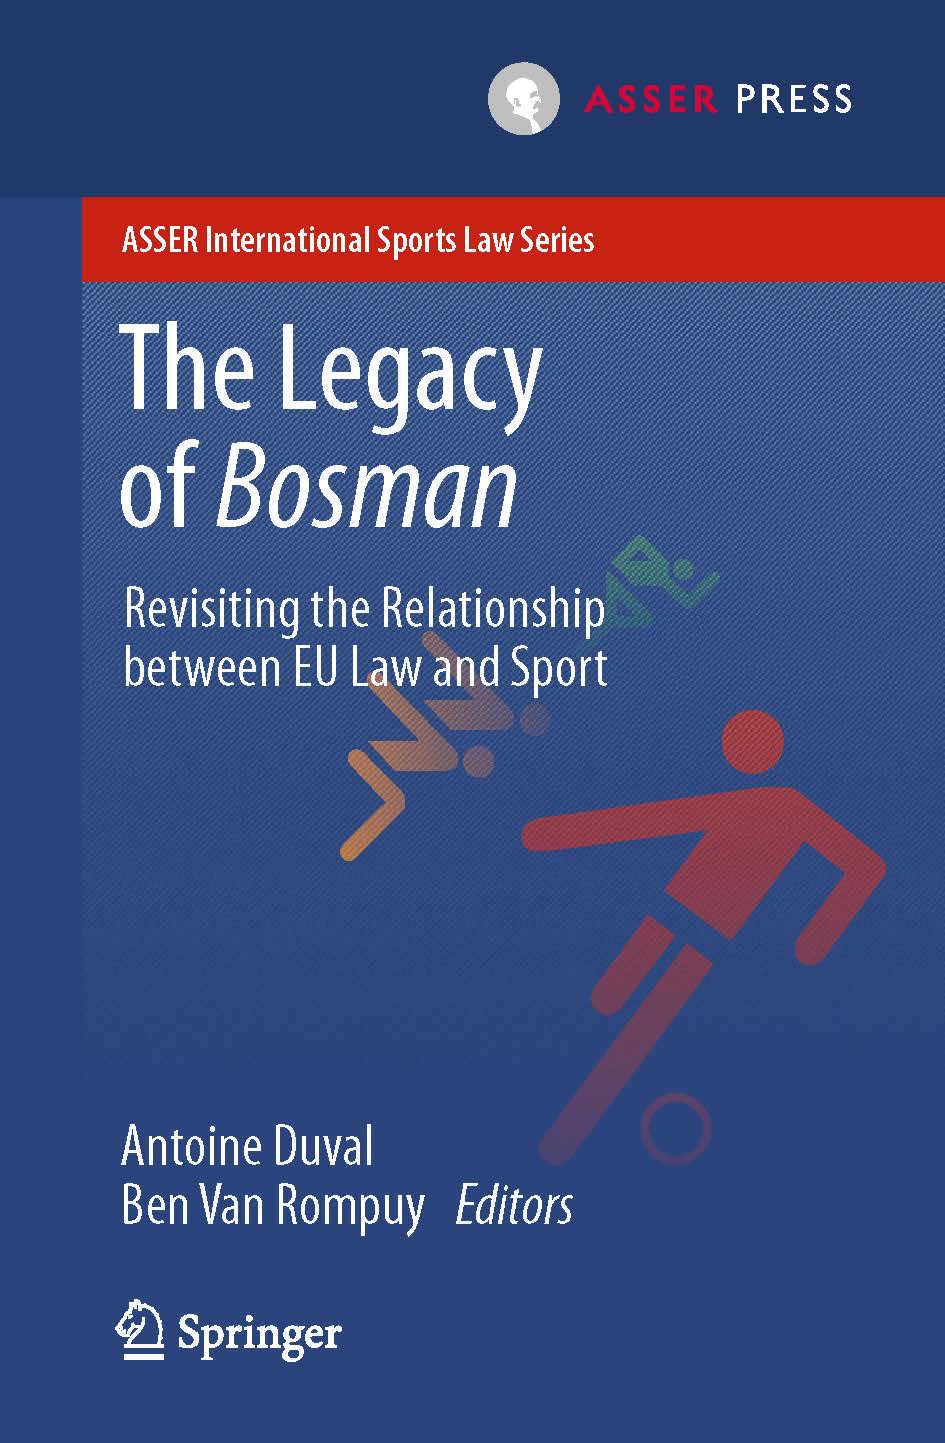 The Legacy of Bosman - Revisiting the Relationship between EU Law and Sport